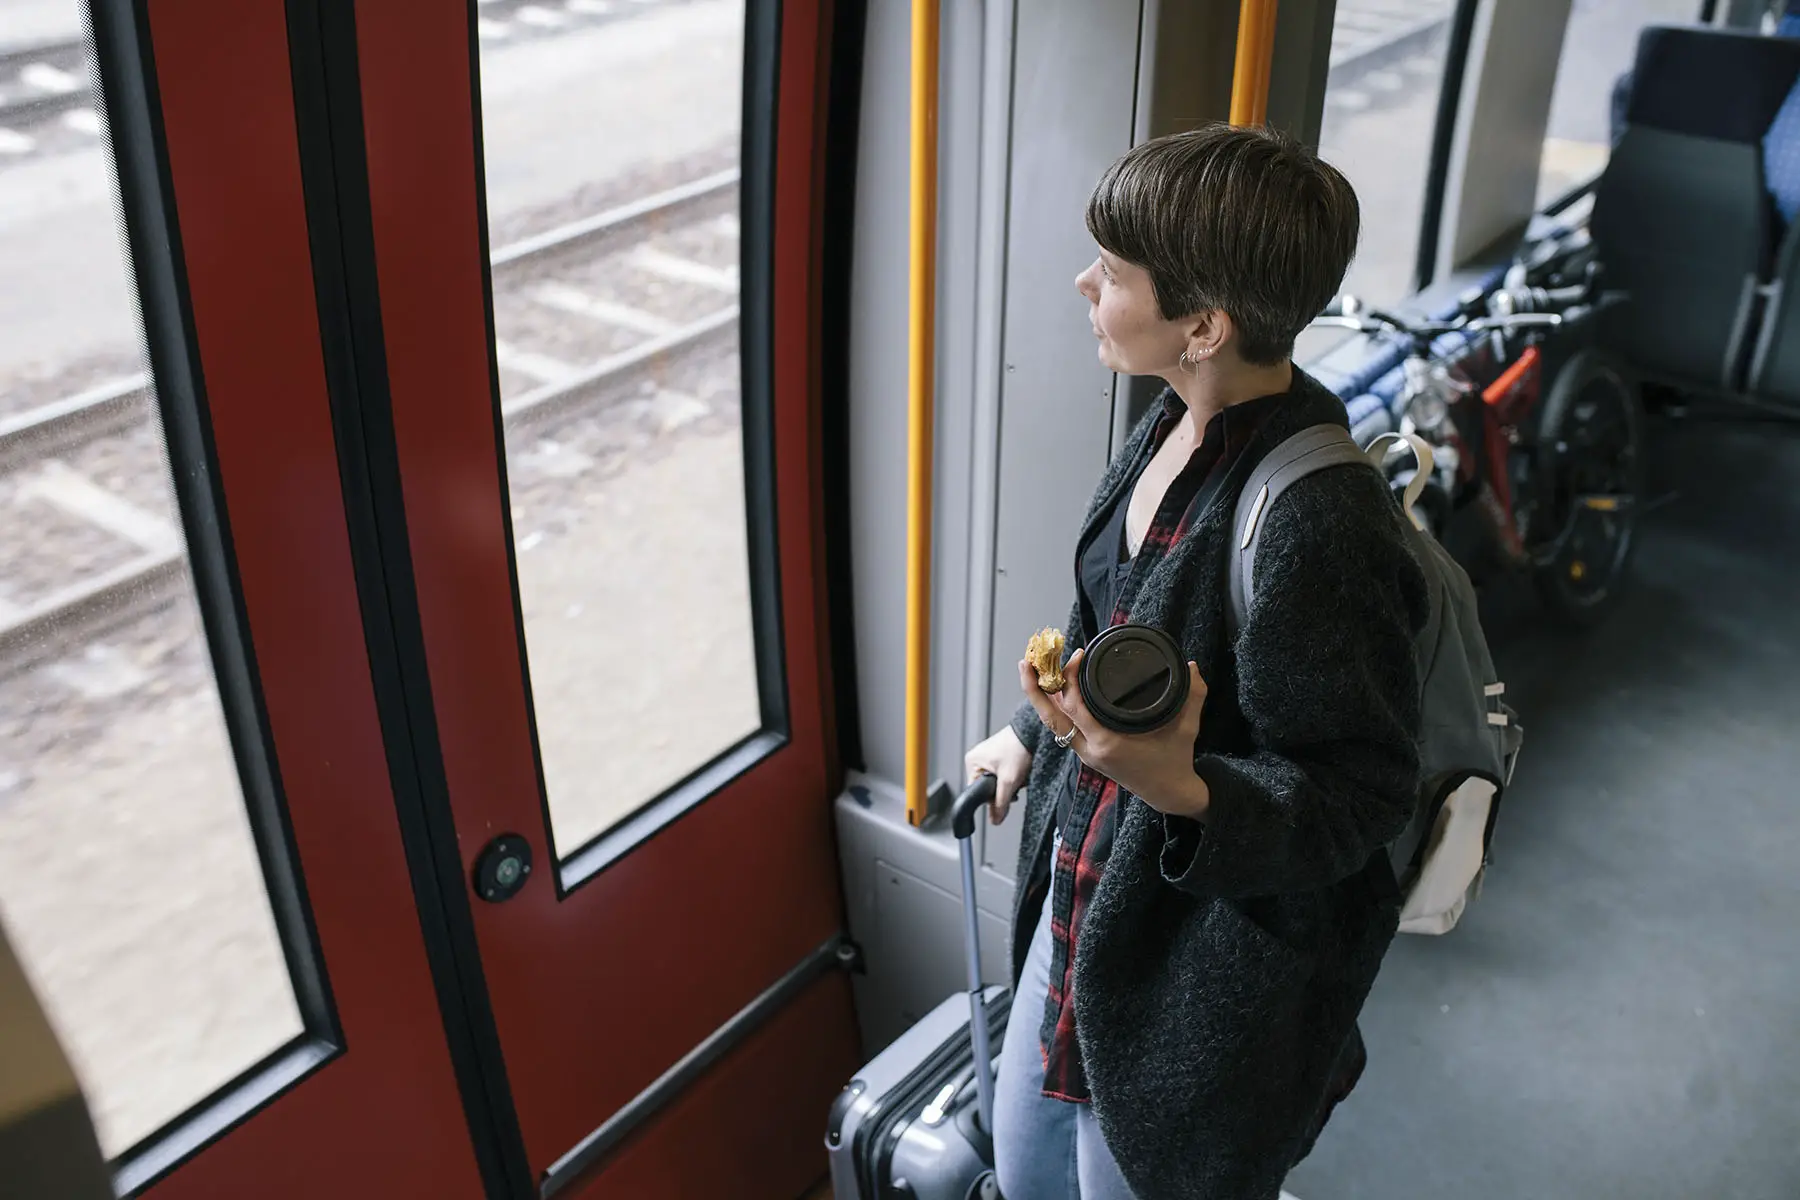 Woman waits at the exit of a train to continue on with her travels.